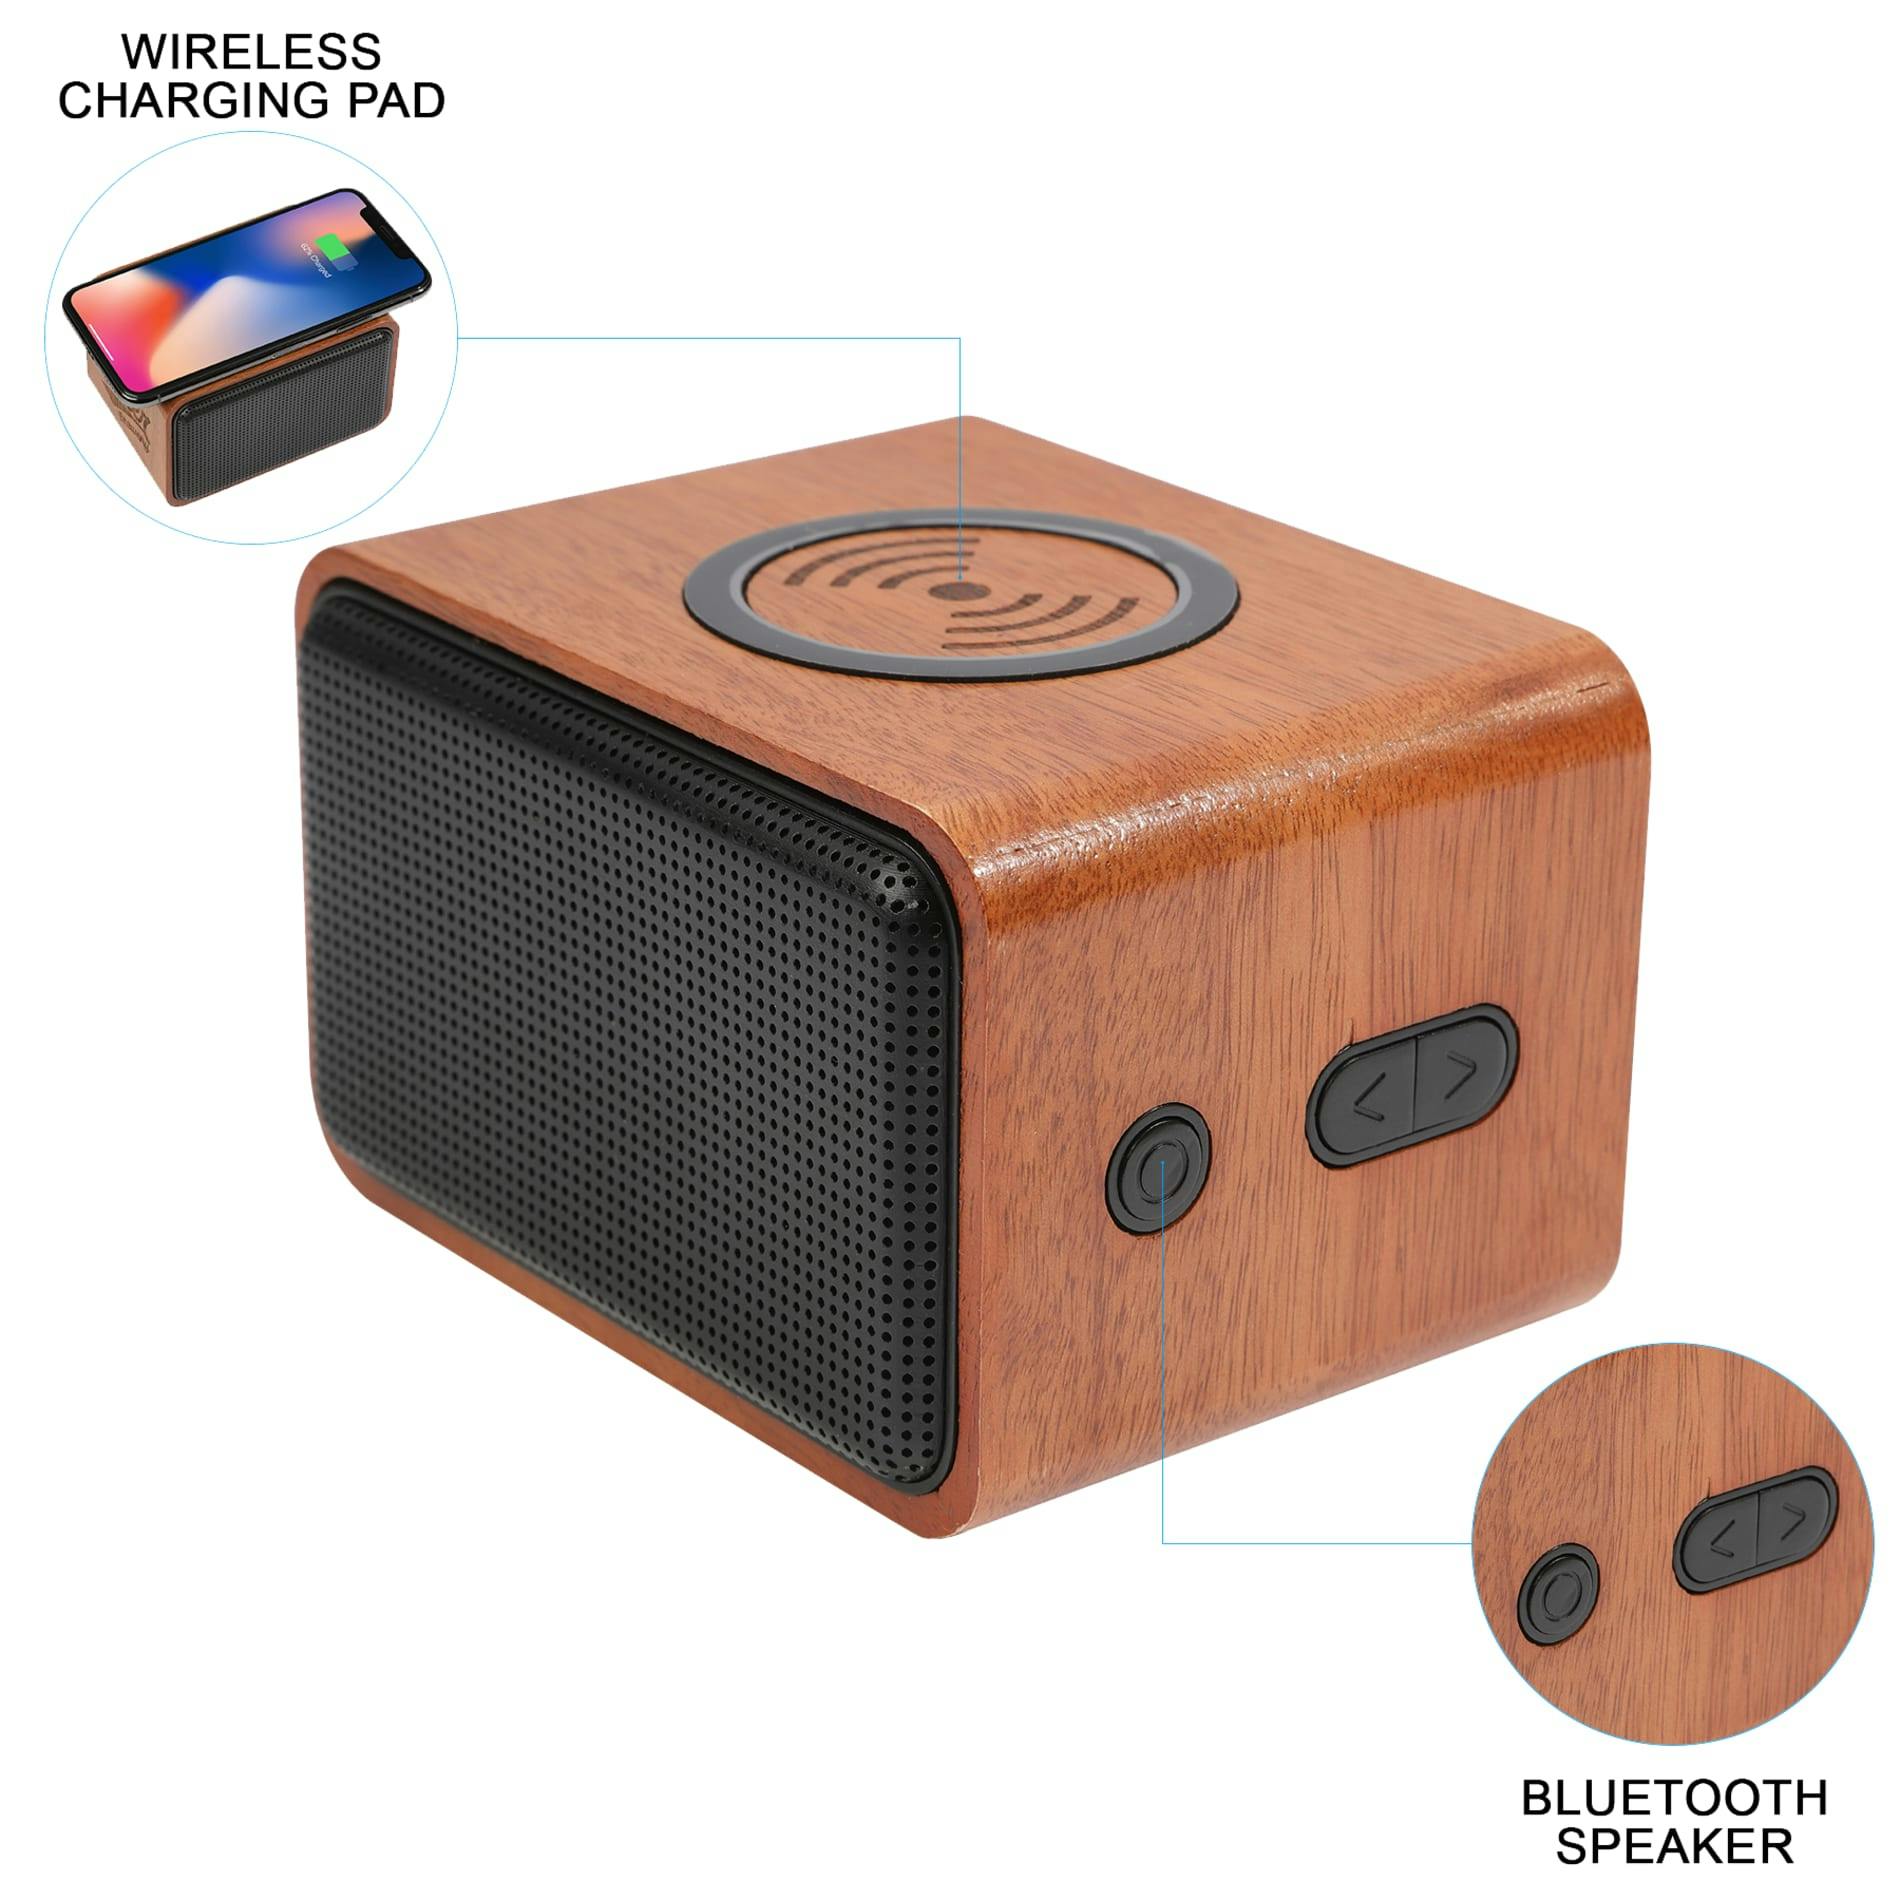 Wood Bluetooth Speaker with Wireless Charging Pad - additional Image 7